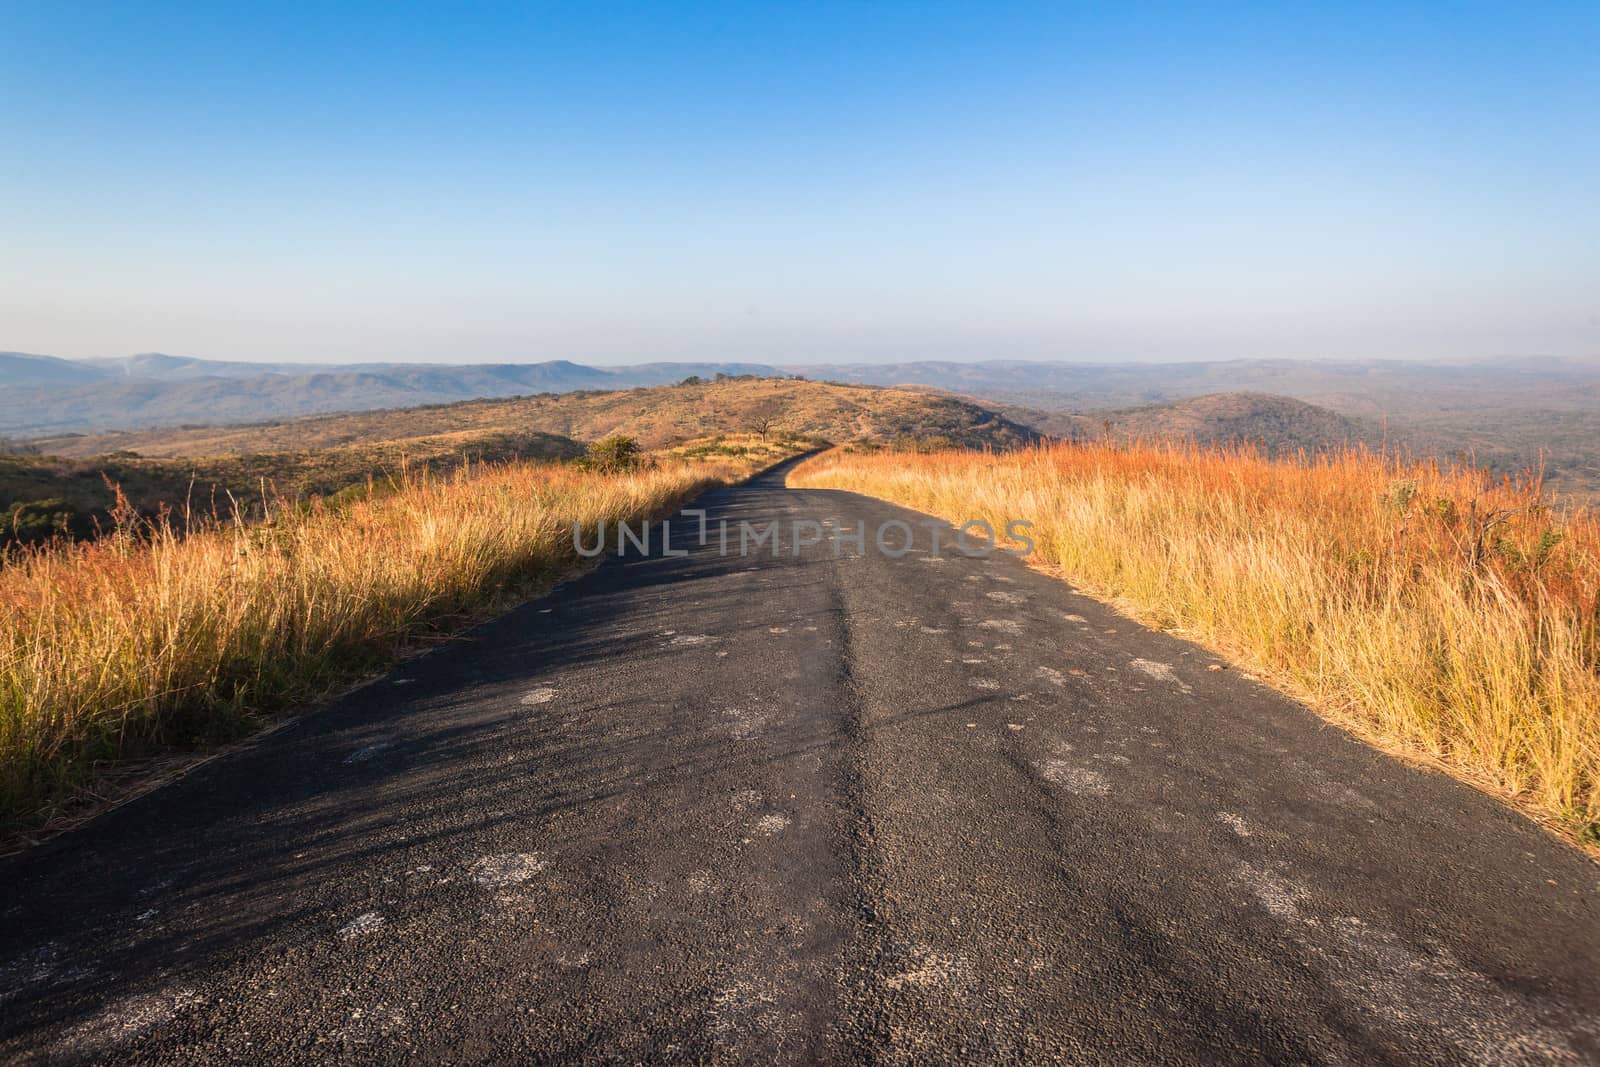 Narrow Tarred road across rugged terrain in thick grass vegetation in wildlife park reserve